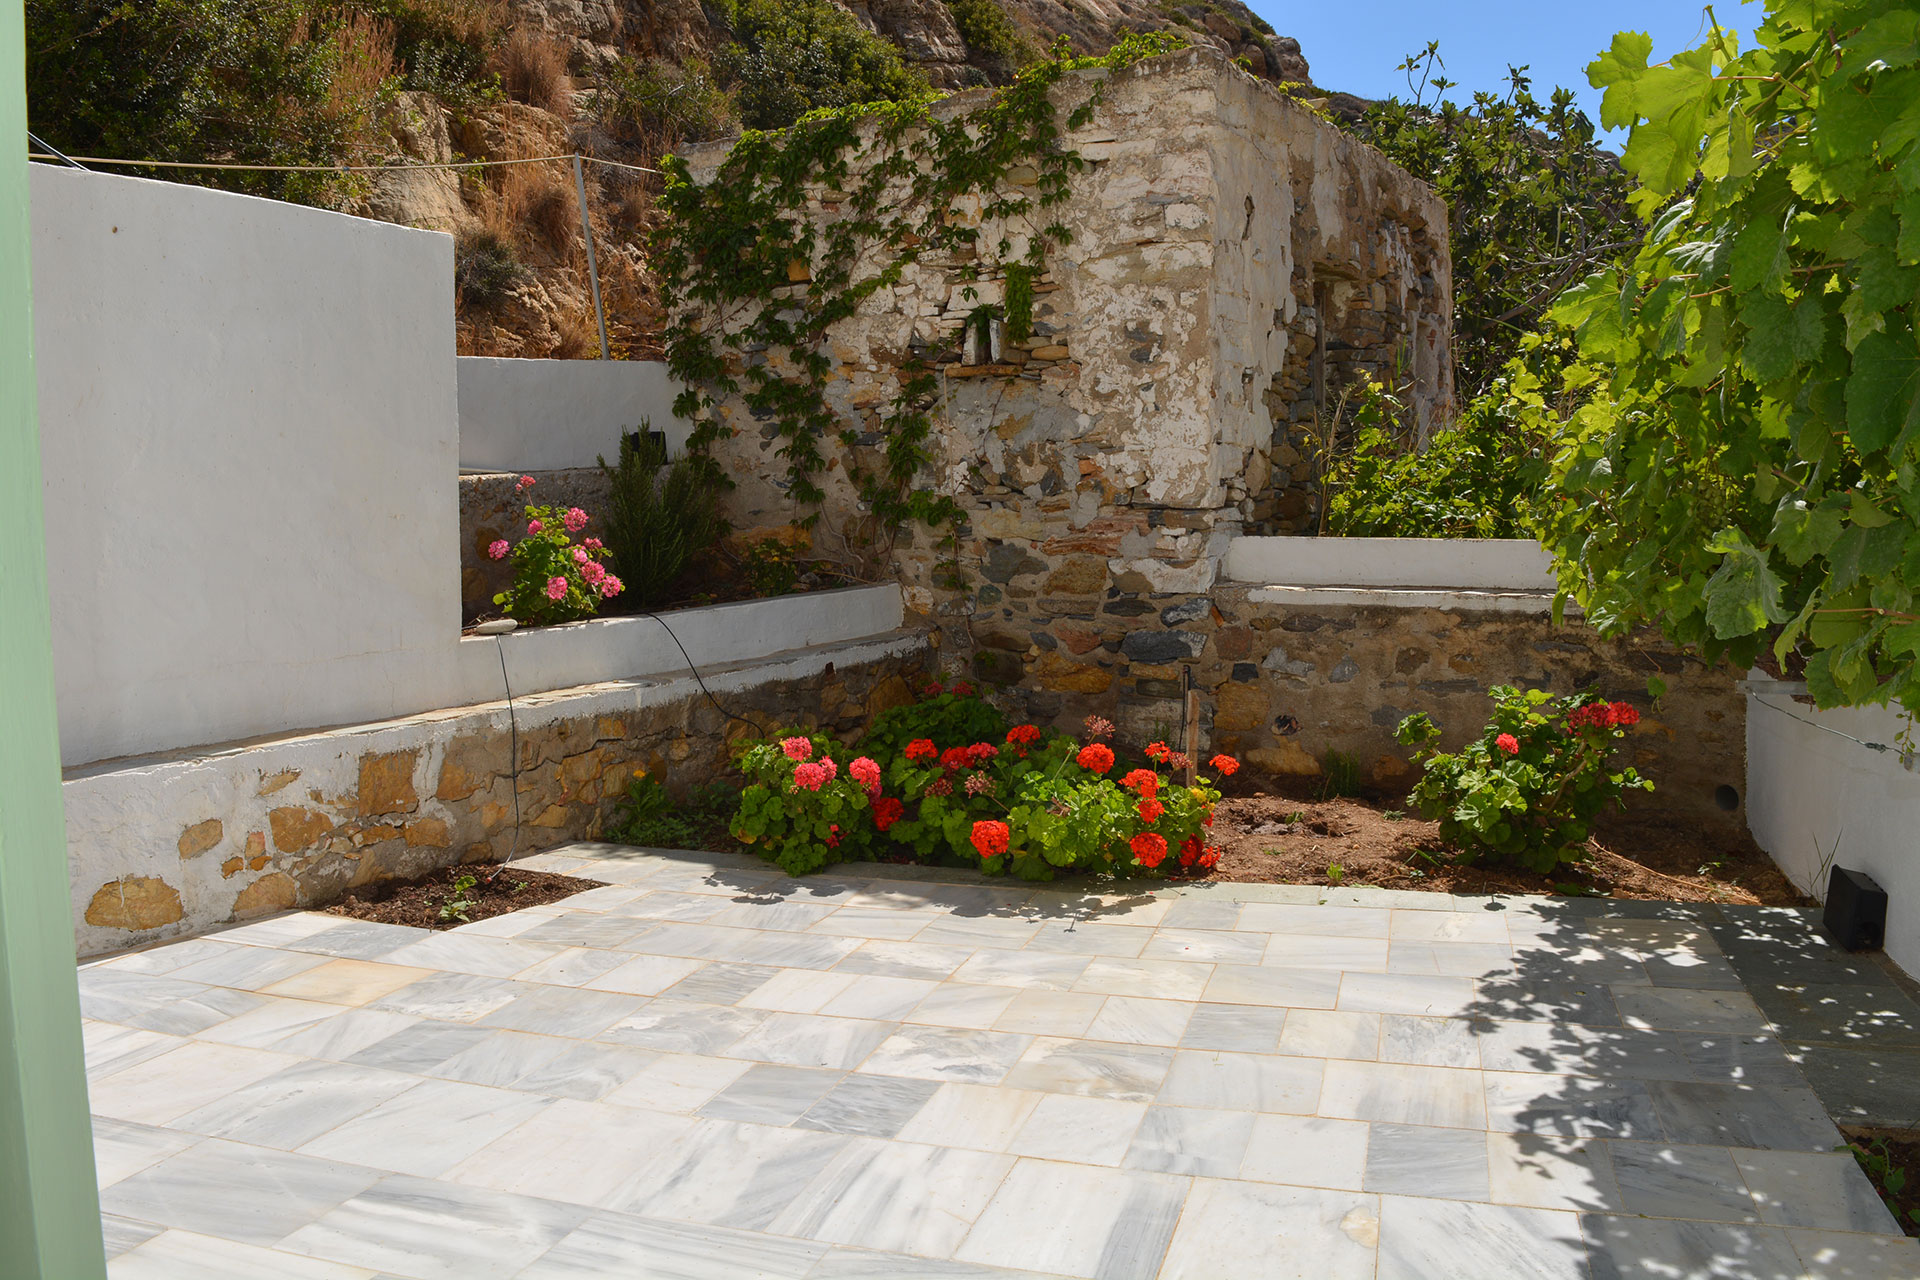 The apartment of Klados accommodation in Sifnos